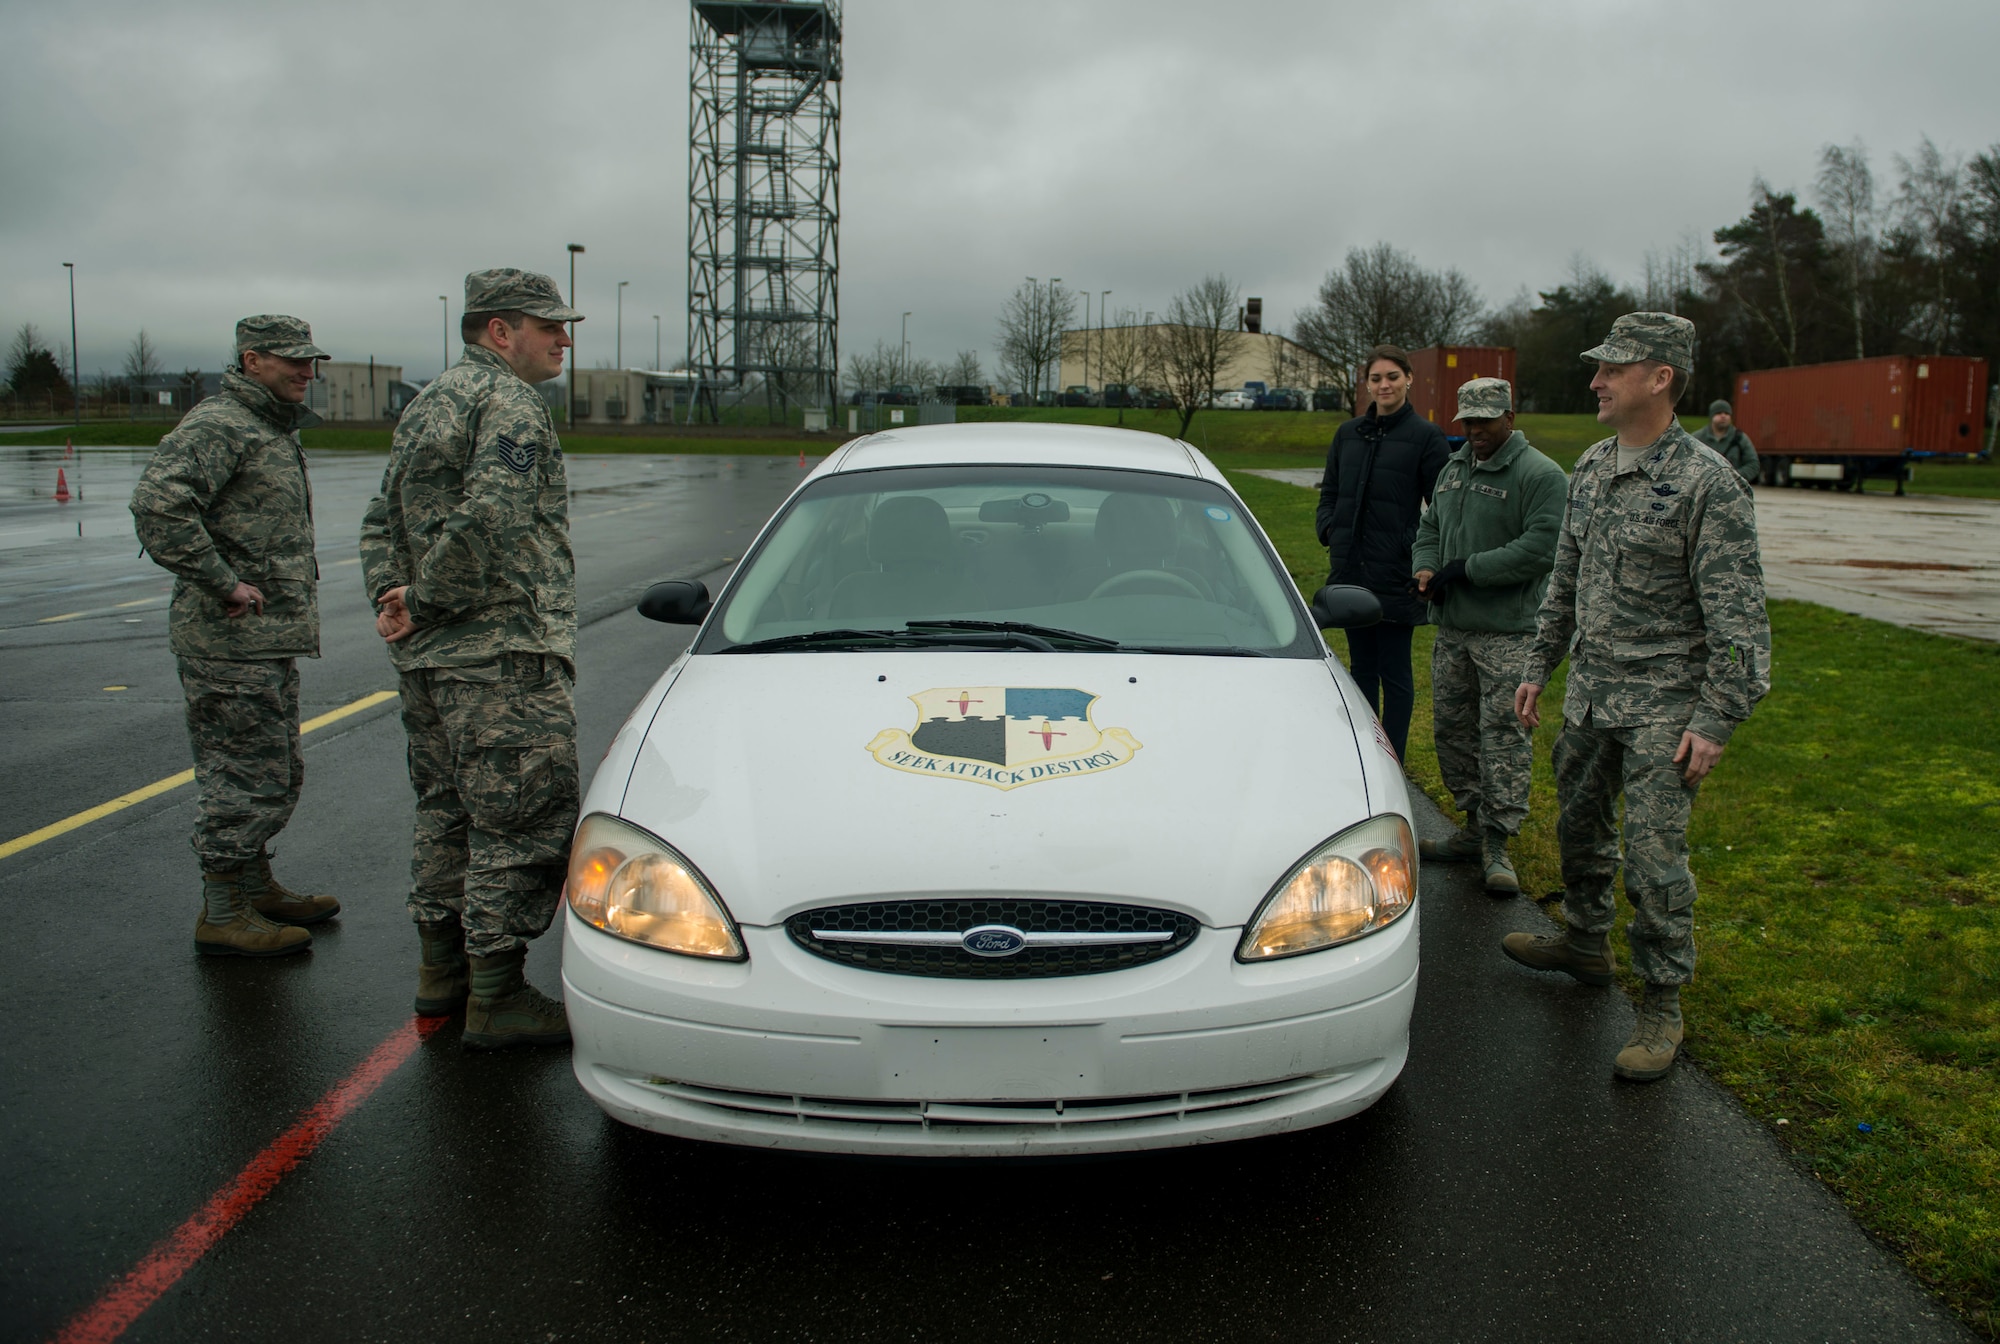 The 52nd Fighter Wing Safety team speaks during a training session at the Saber Driving Course at Spangdahlem Air Base, Germany, Jan. 11, 2016. The vehicle is equipped with special wheel axles that release upon command, simulating a loss of control similar to driving on ice. (U.S. Air Force photo by Airman 1st Class Timothy Kim/Released)